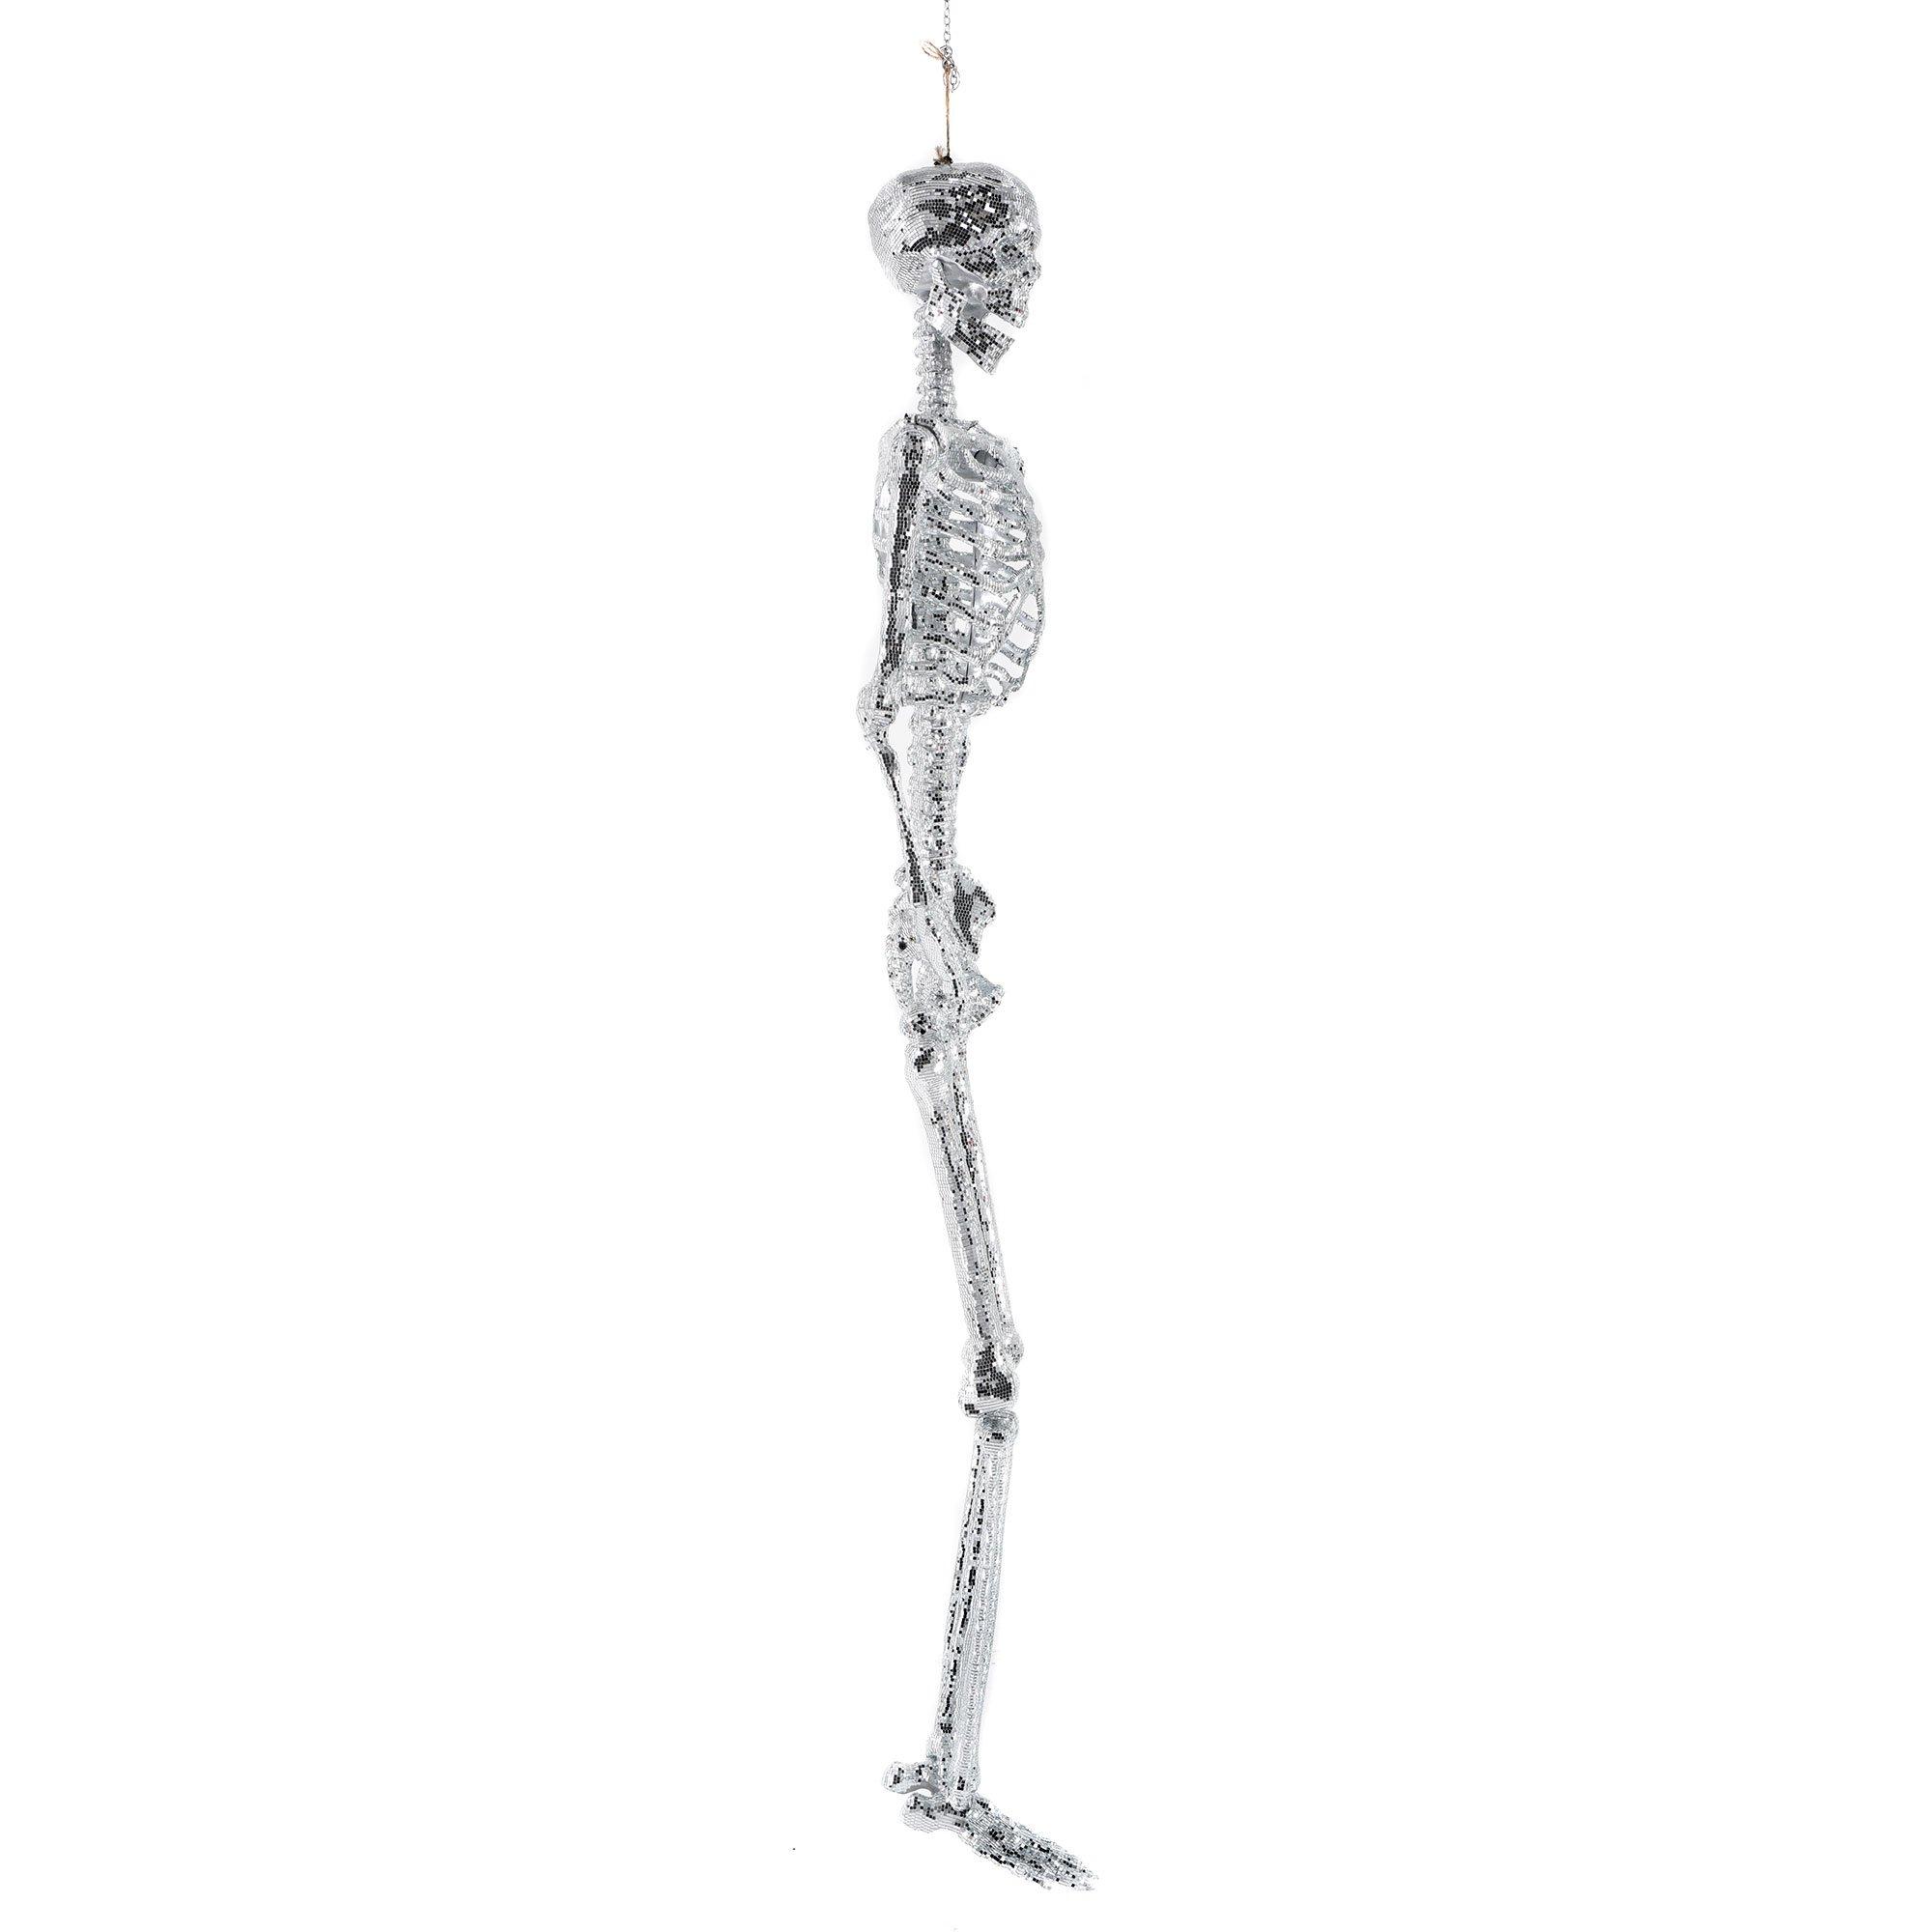 Shelley the Hanging Poseable Disco Mirror Skeleton, 6ft - Halloween Decoration